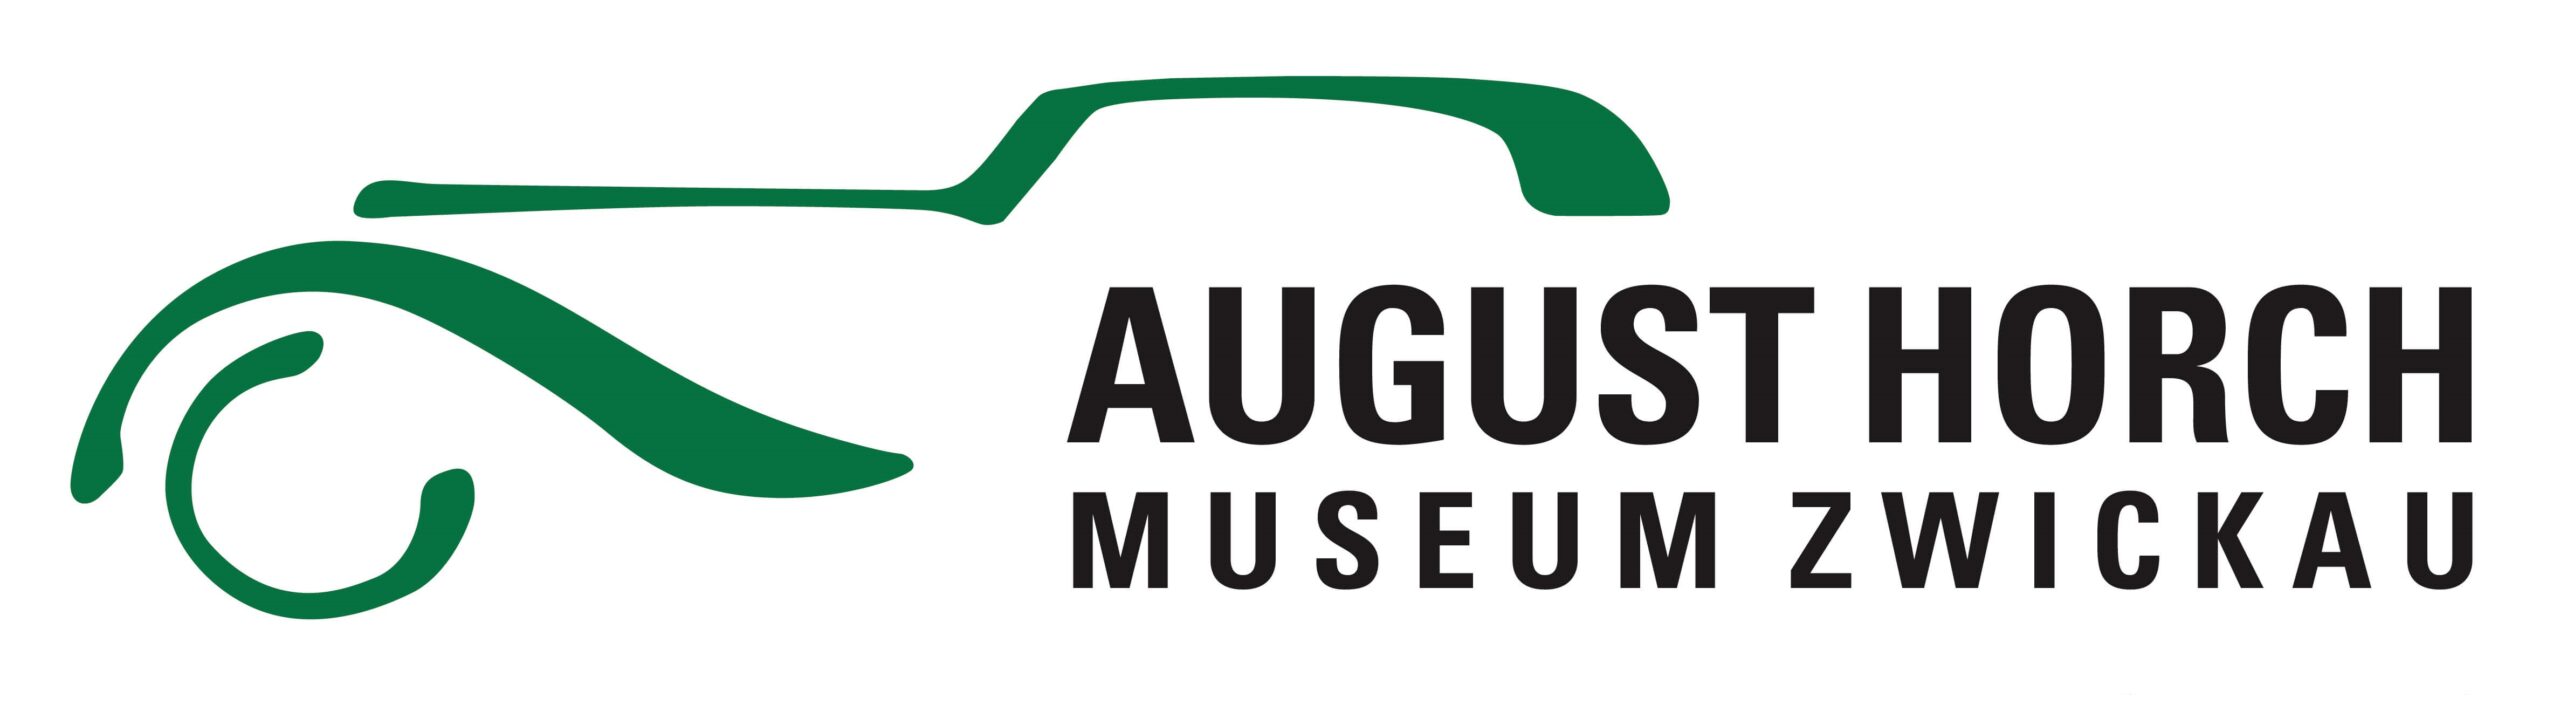 Featured image for “August Horch Museum Zwickau”